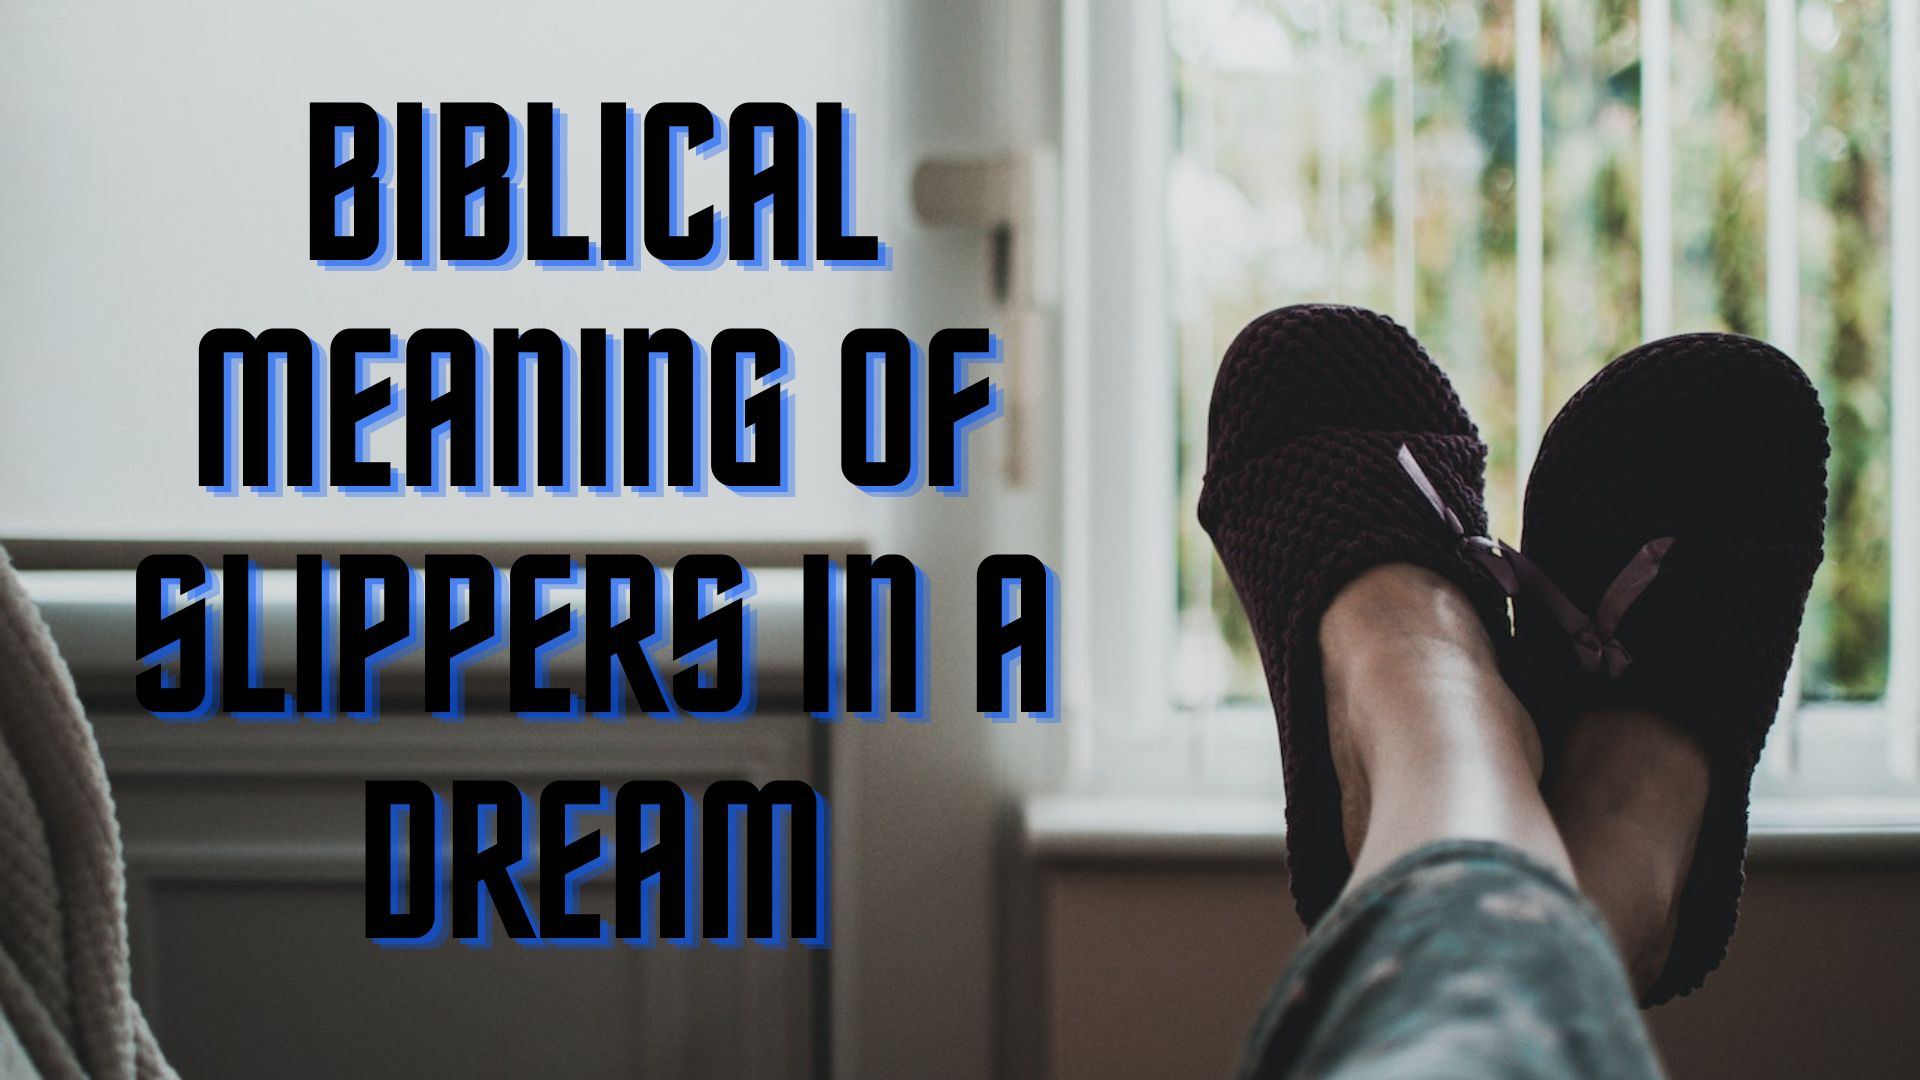 Biblical Meaning Of Slippers In A Dream - Symbolizes A New Thing